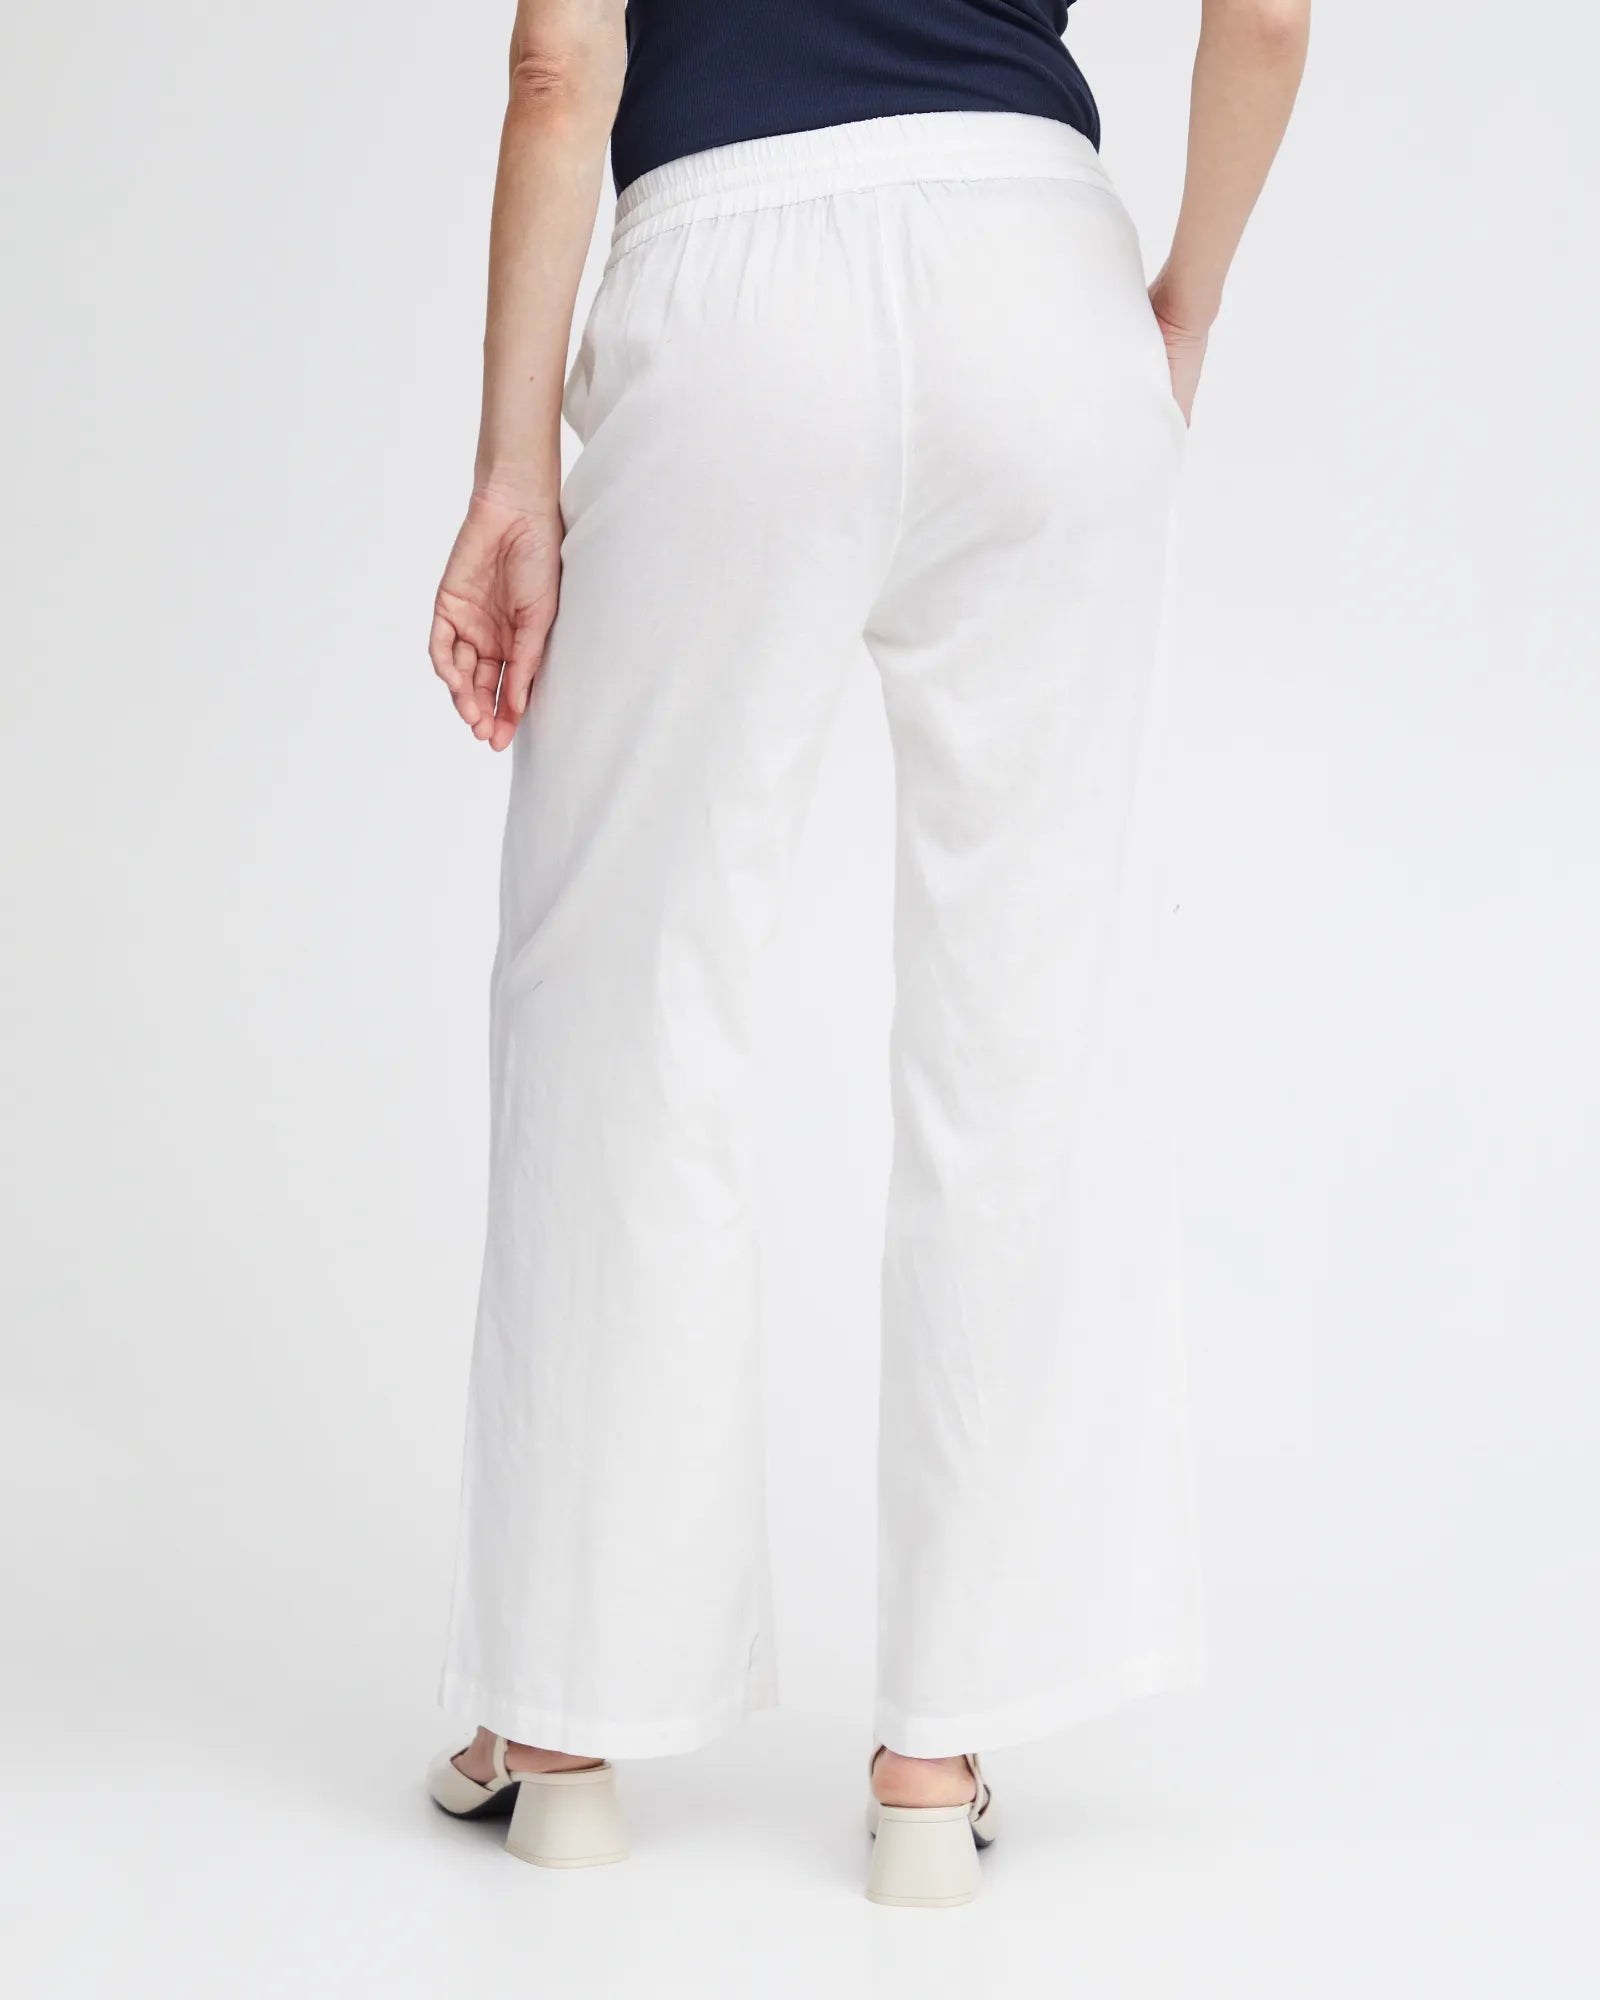 FRMADDIE Trousers - White